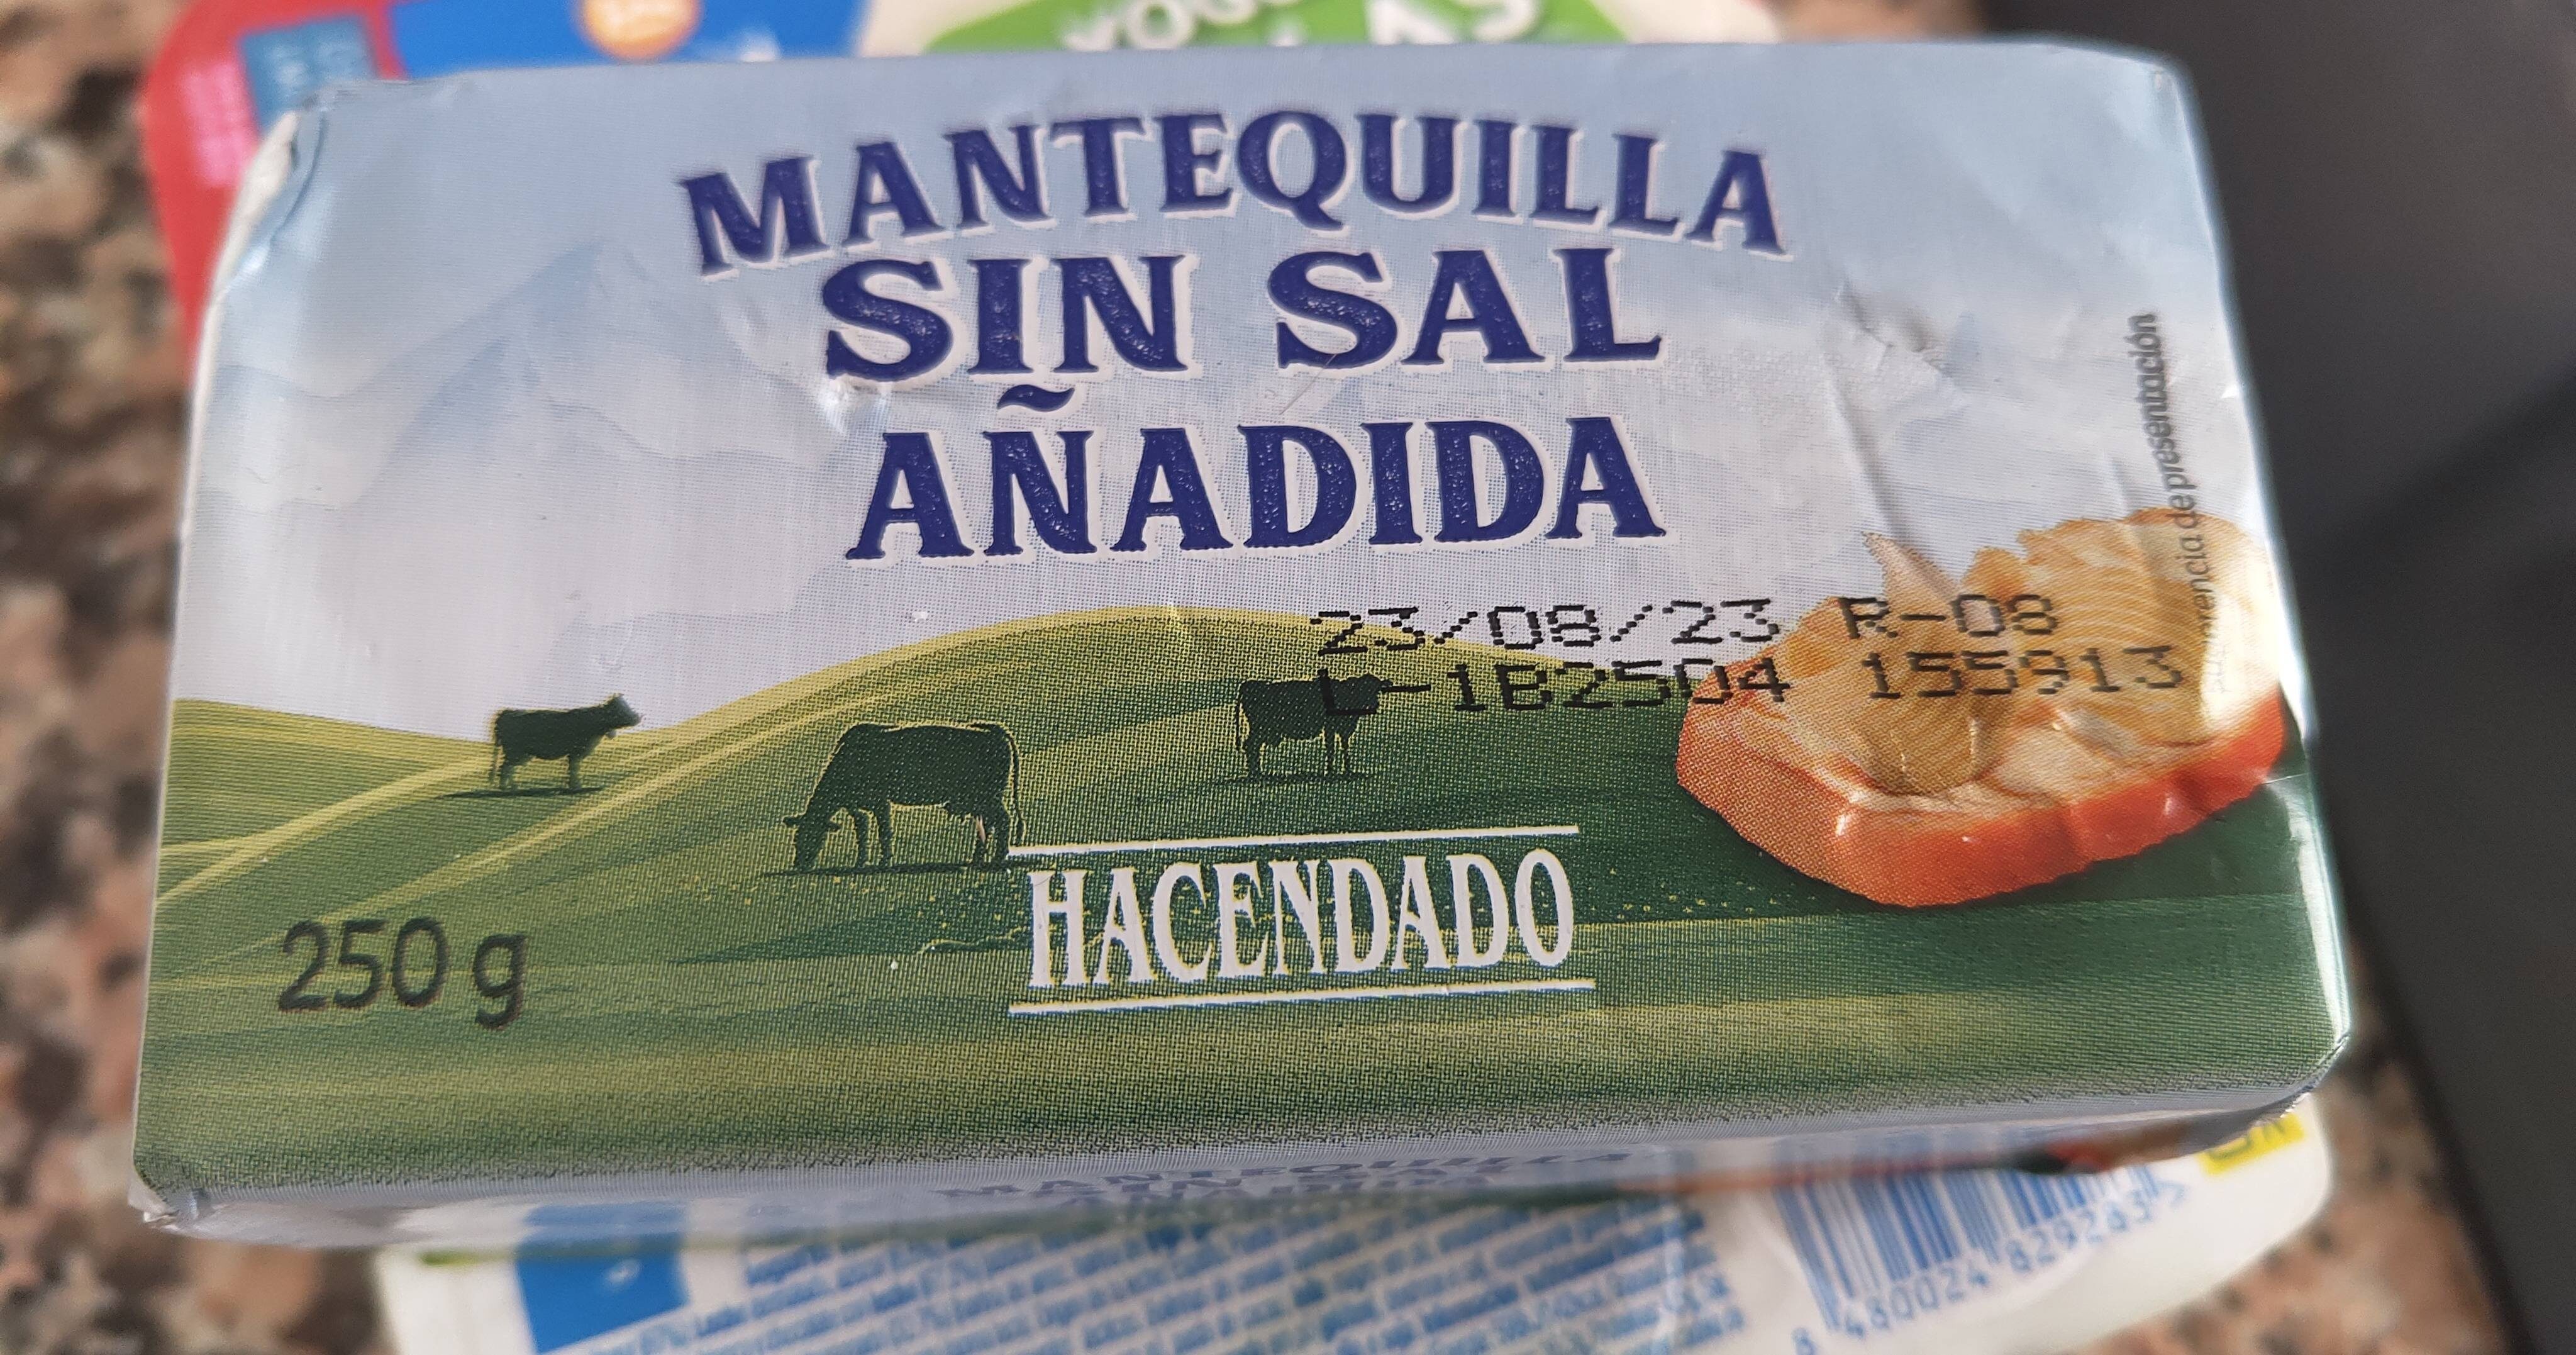 Mantequilla sin sal - Product